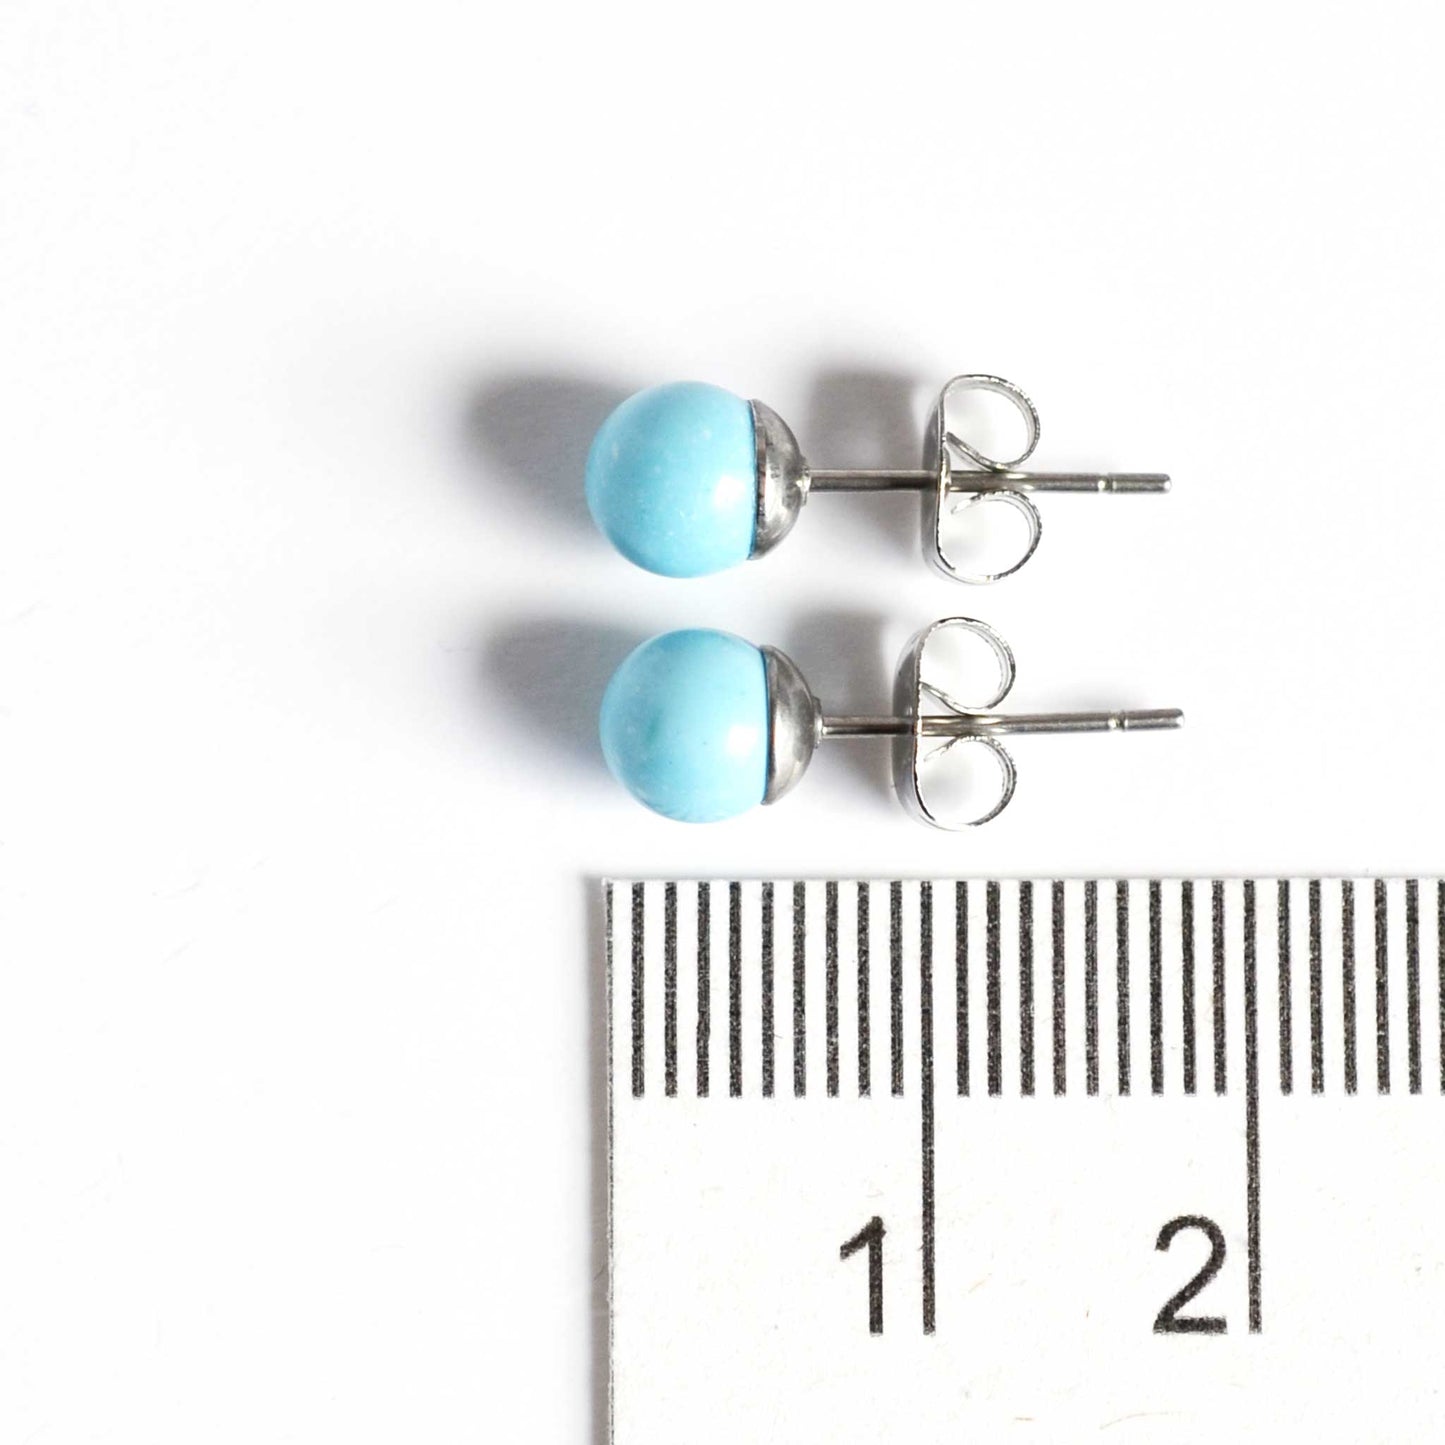 6mm Turquoise earrings studs next to ruler